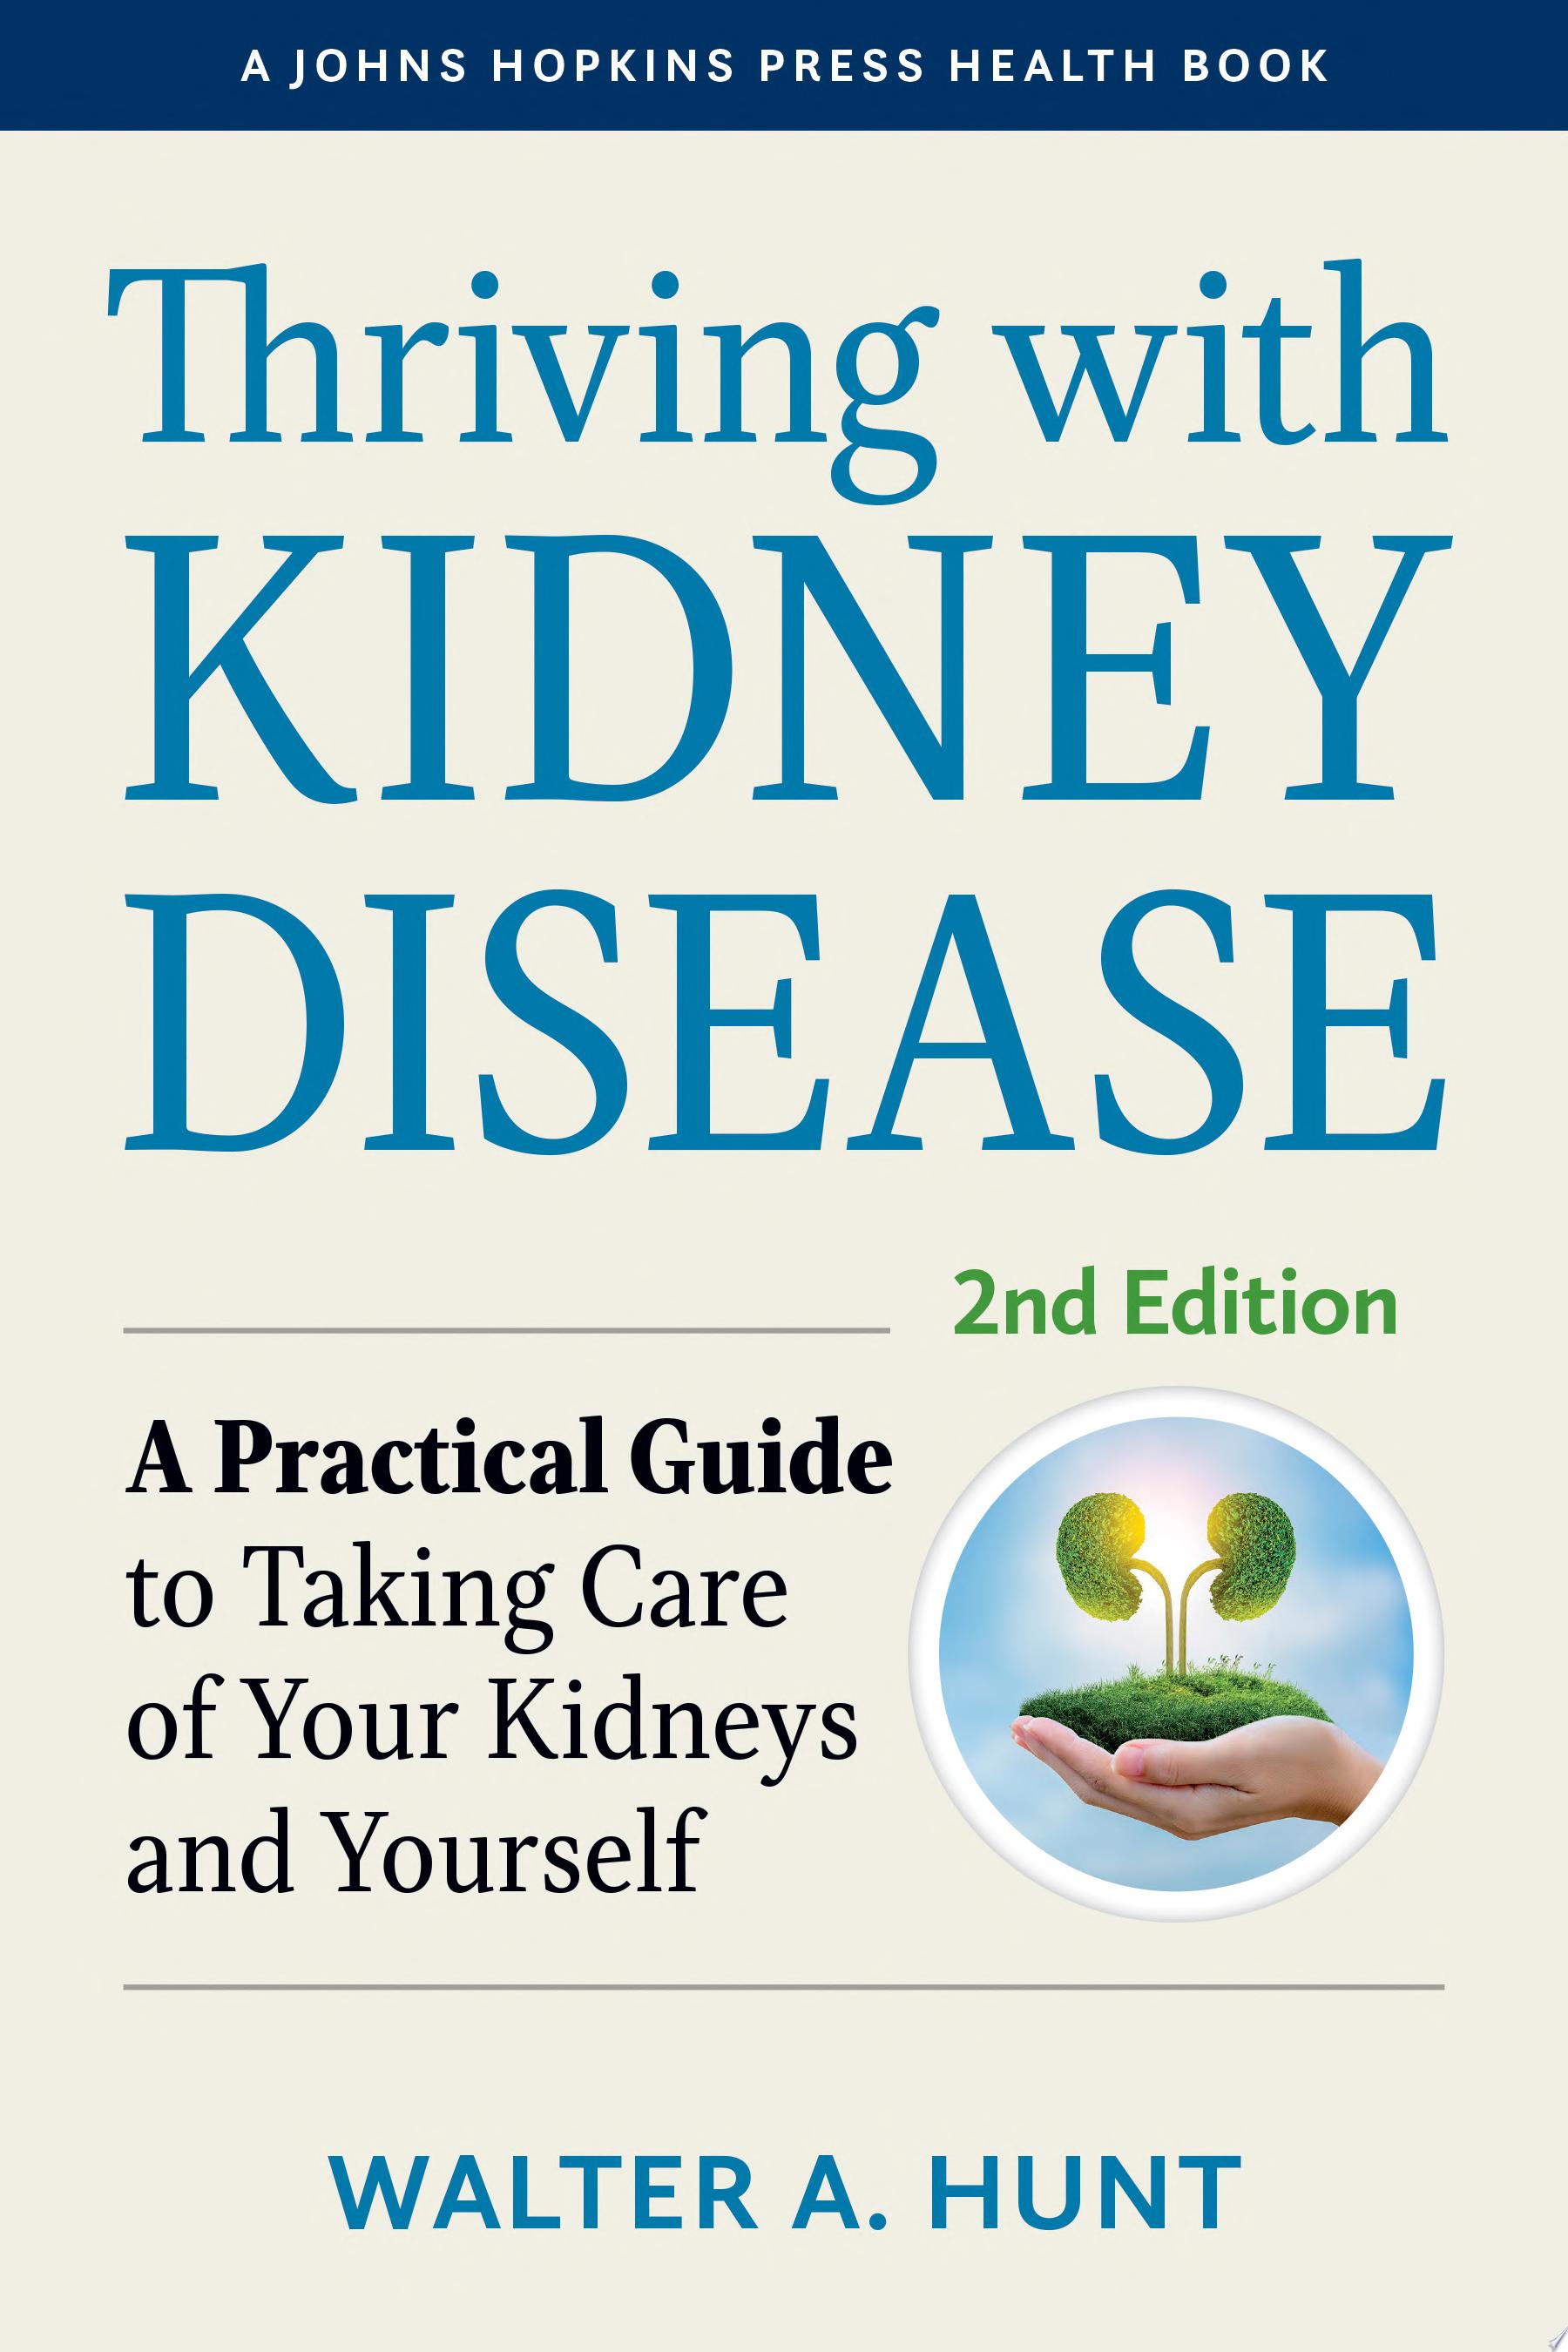 Image for "Thriving with Kidney Disease"